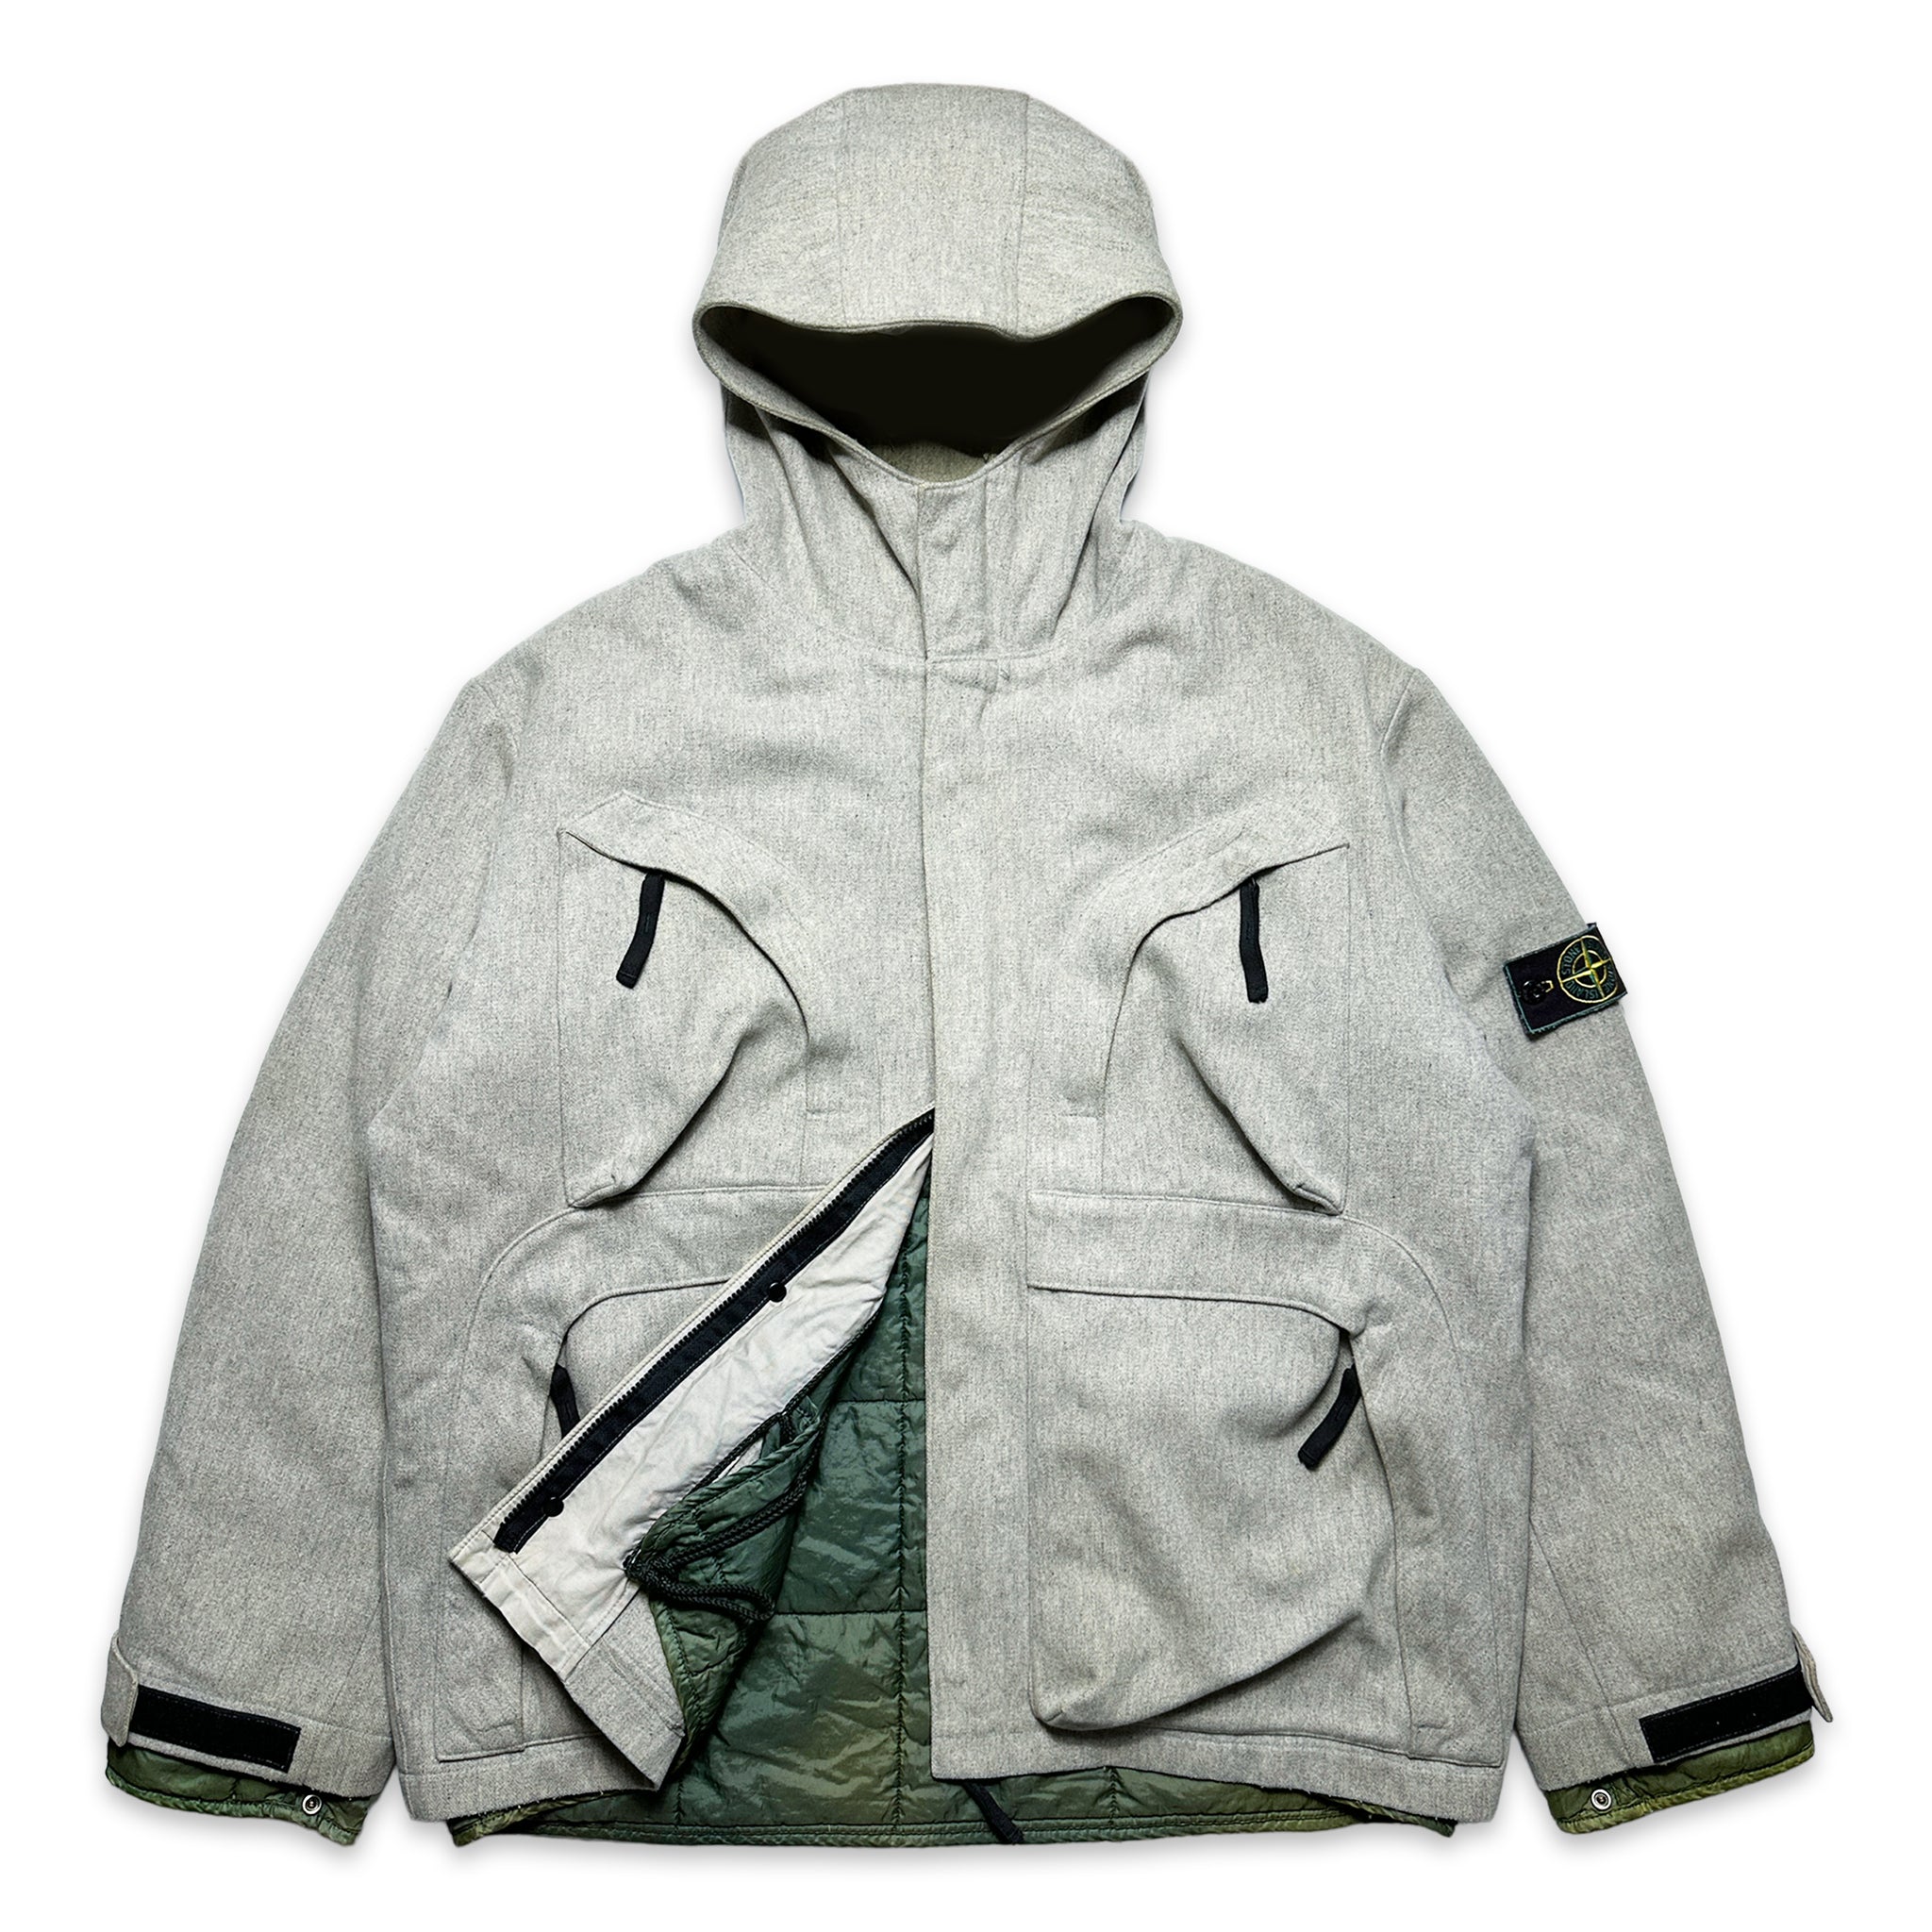 AW98' Stone Island Multi Pocket Wool Jacket with Removable Liner 